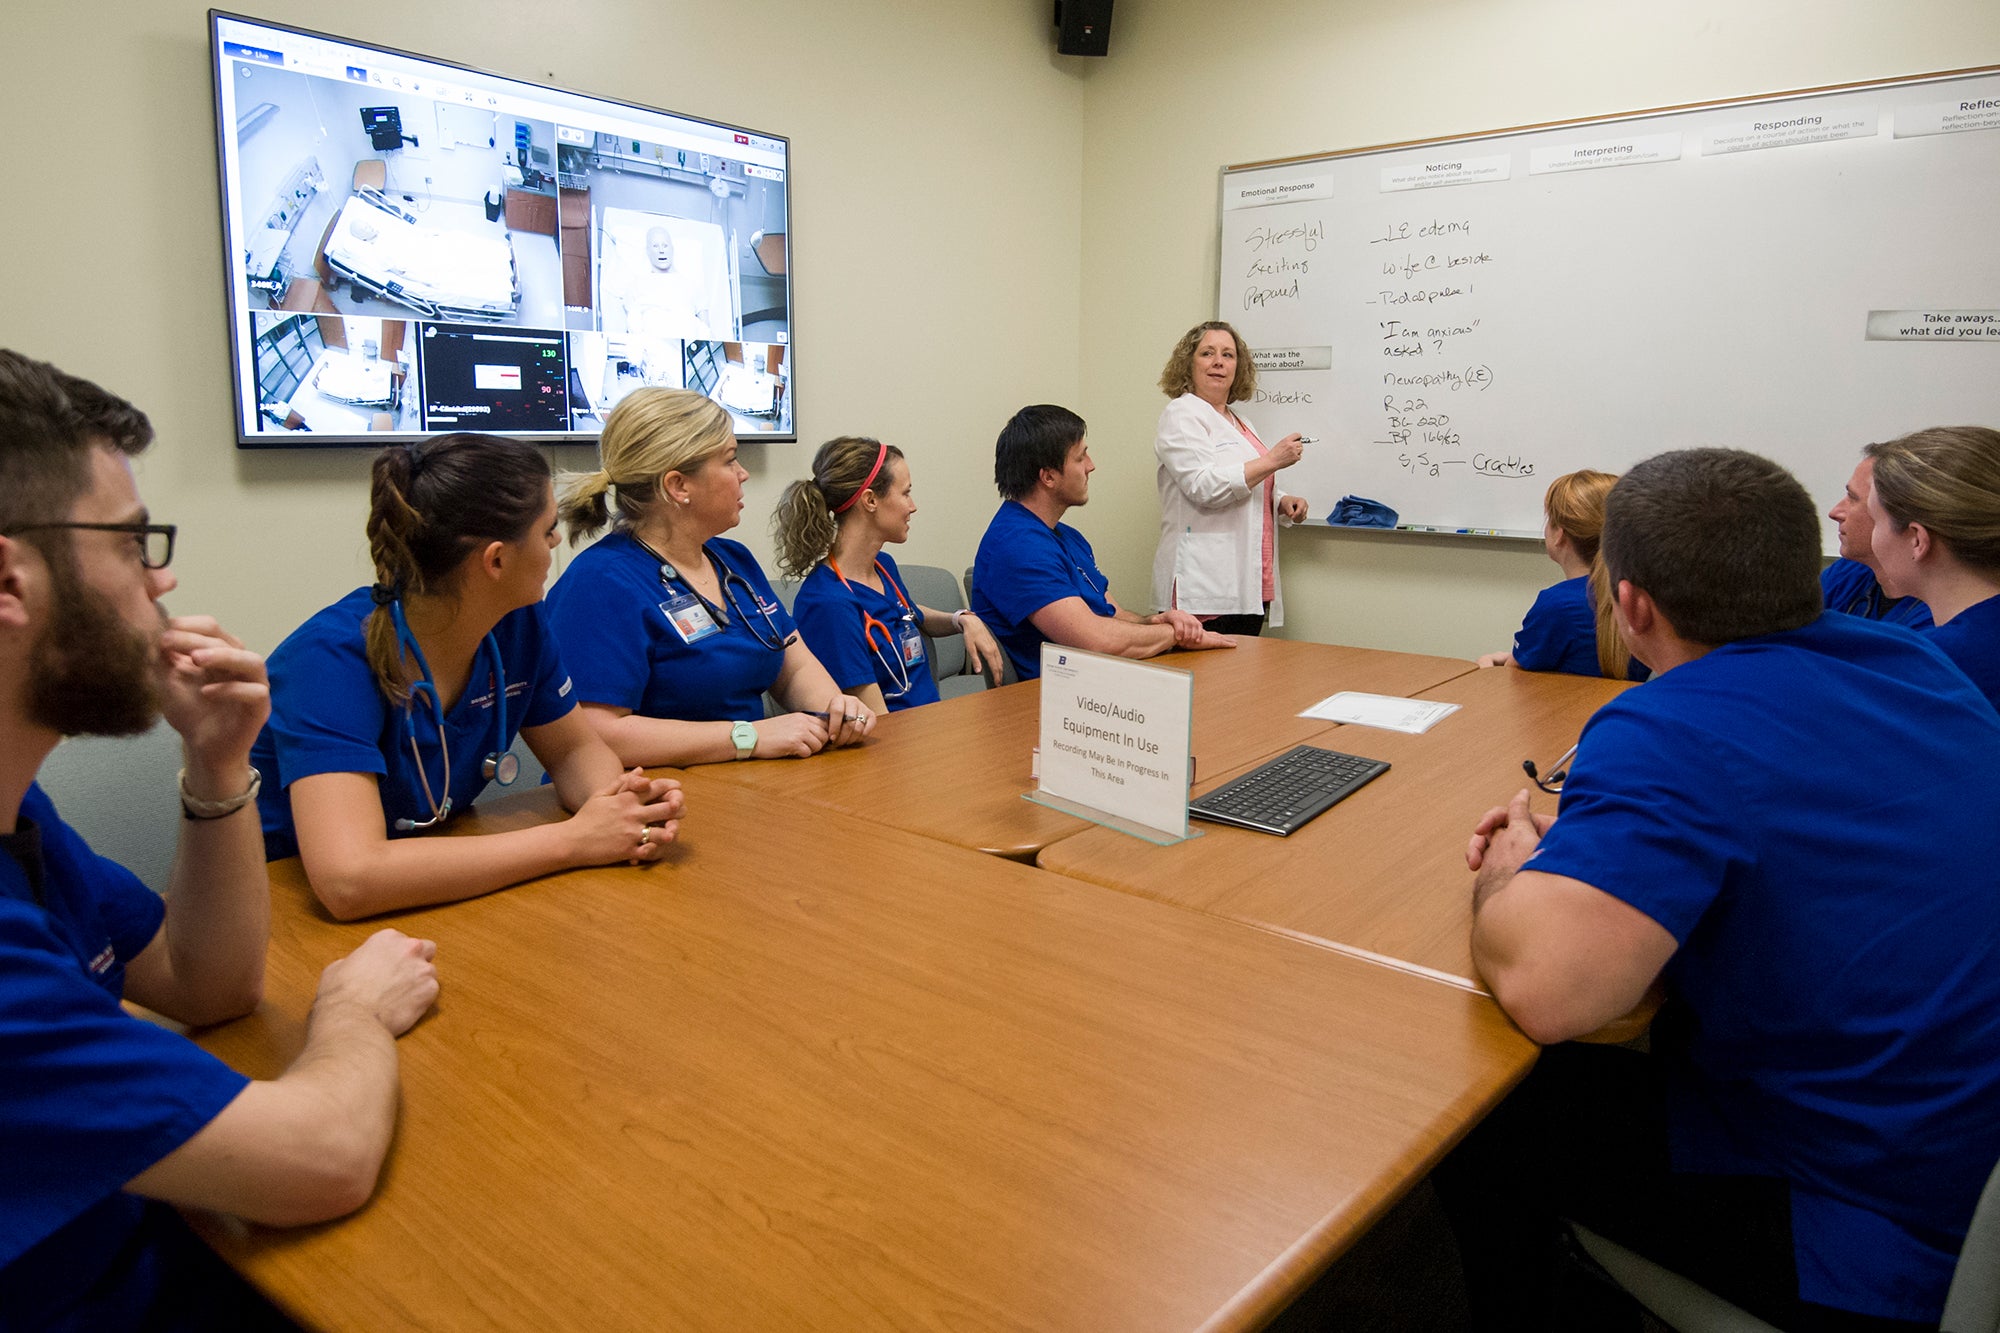 A professor wearing a white coat teaches a group of students wearing scrubs